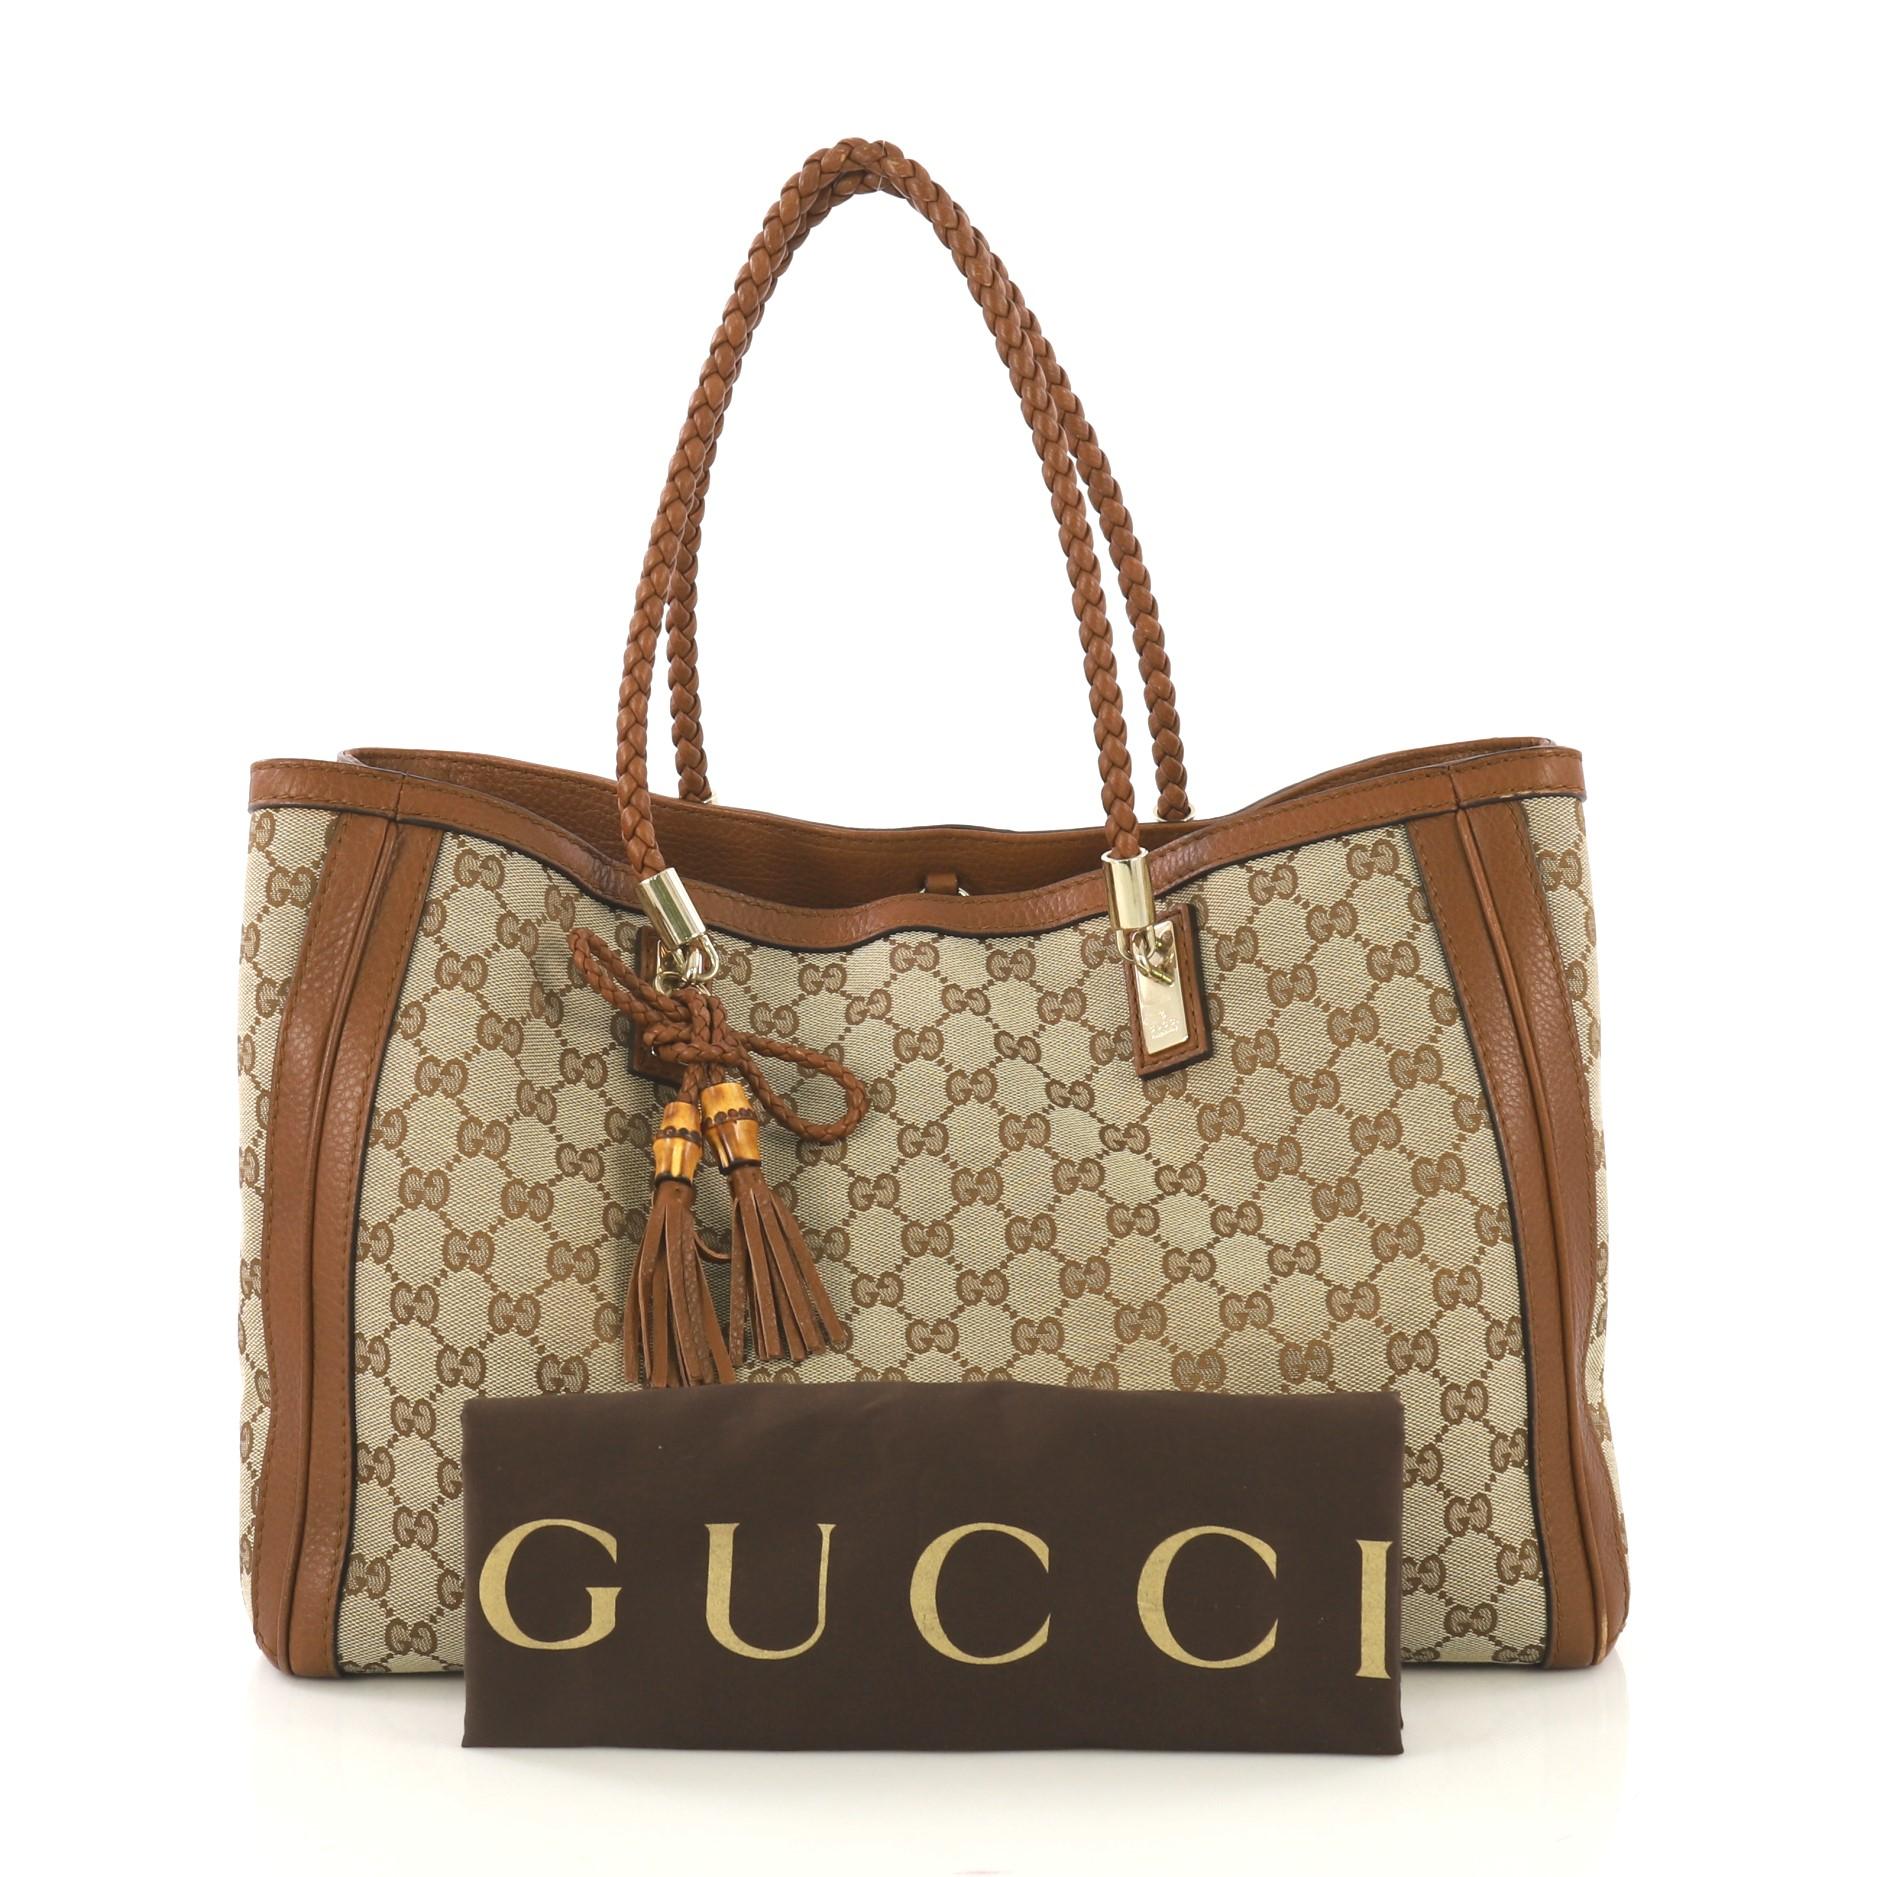 This Gucci Bella Tote GG Canvas Medium, crafted from brown GG canvas, features dual braided leather handles, protective base studs, leather trim, and gold-tone hardware. Its hook closure opens to a beige fabric interior divided into two compartments